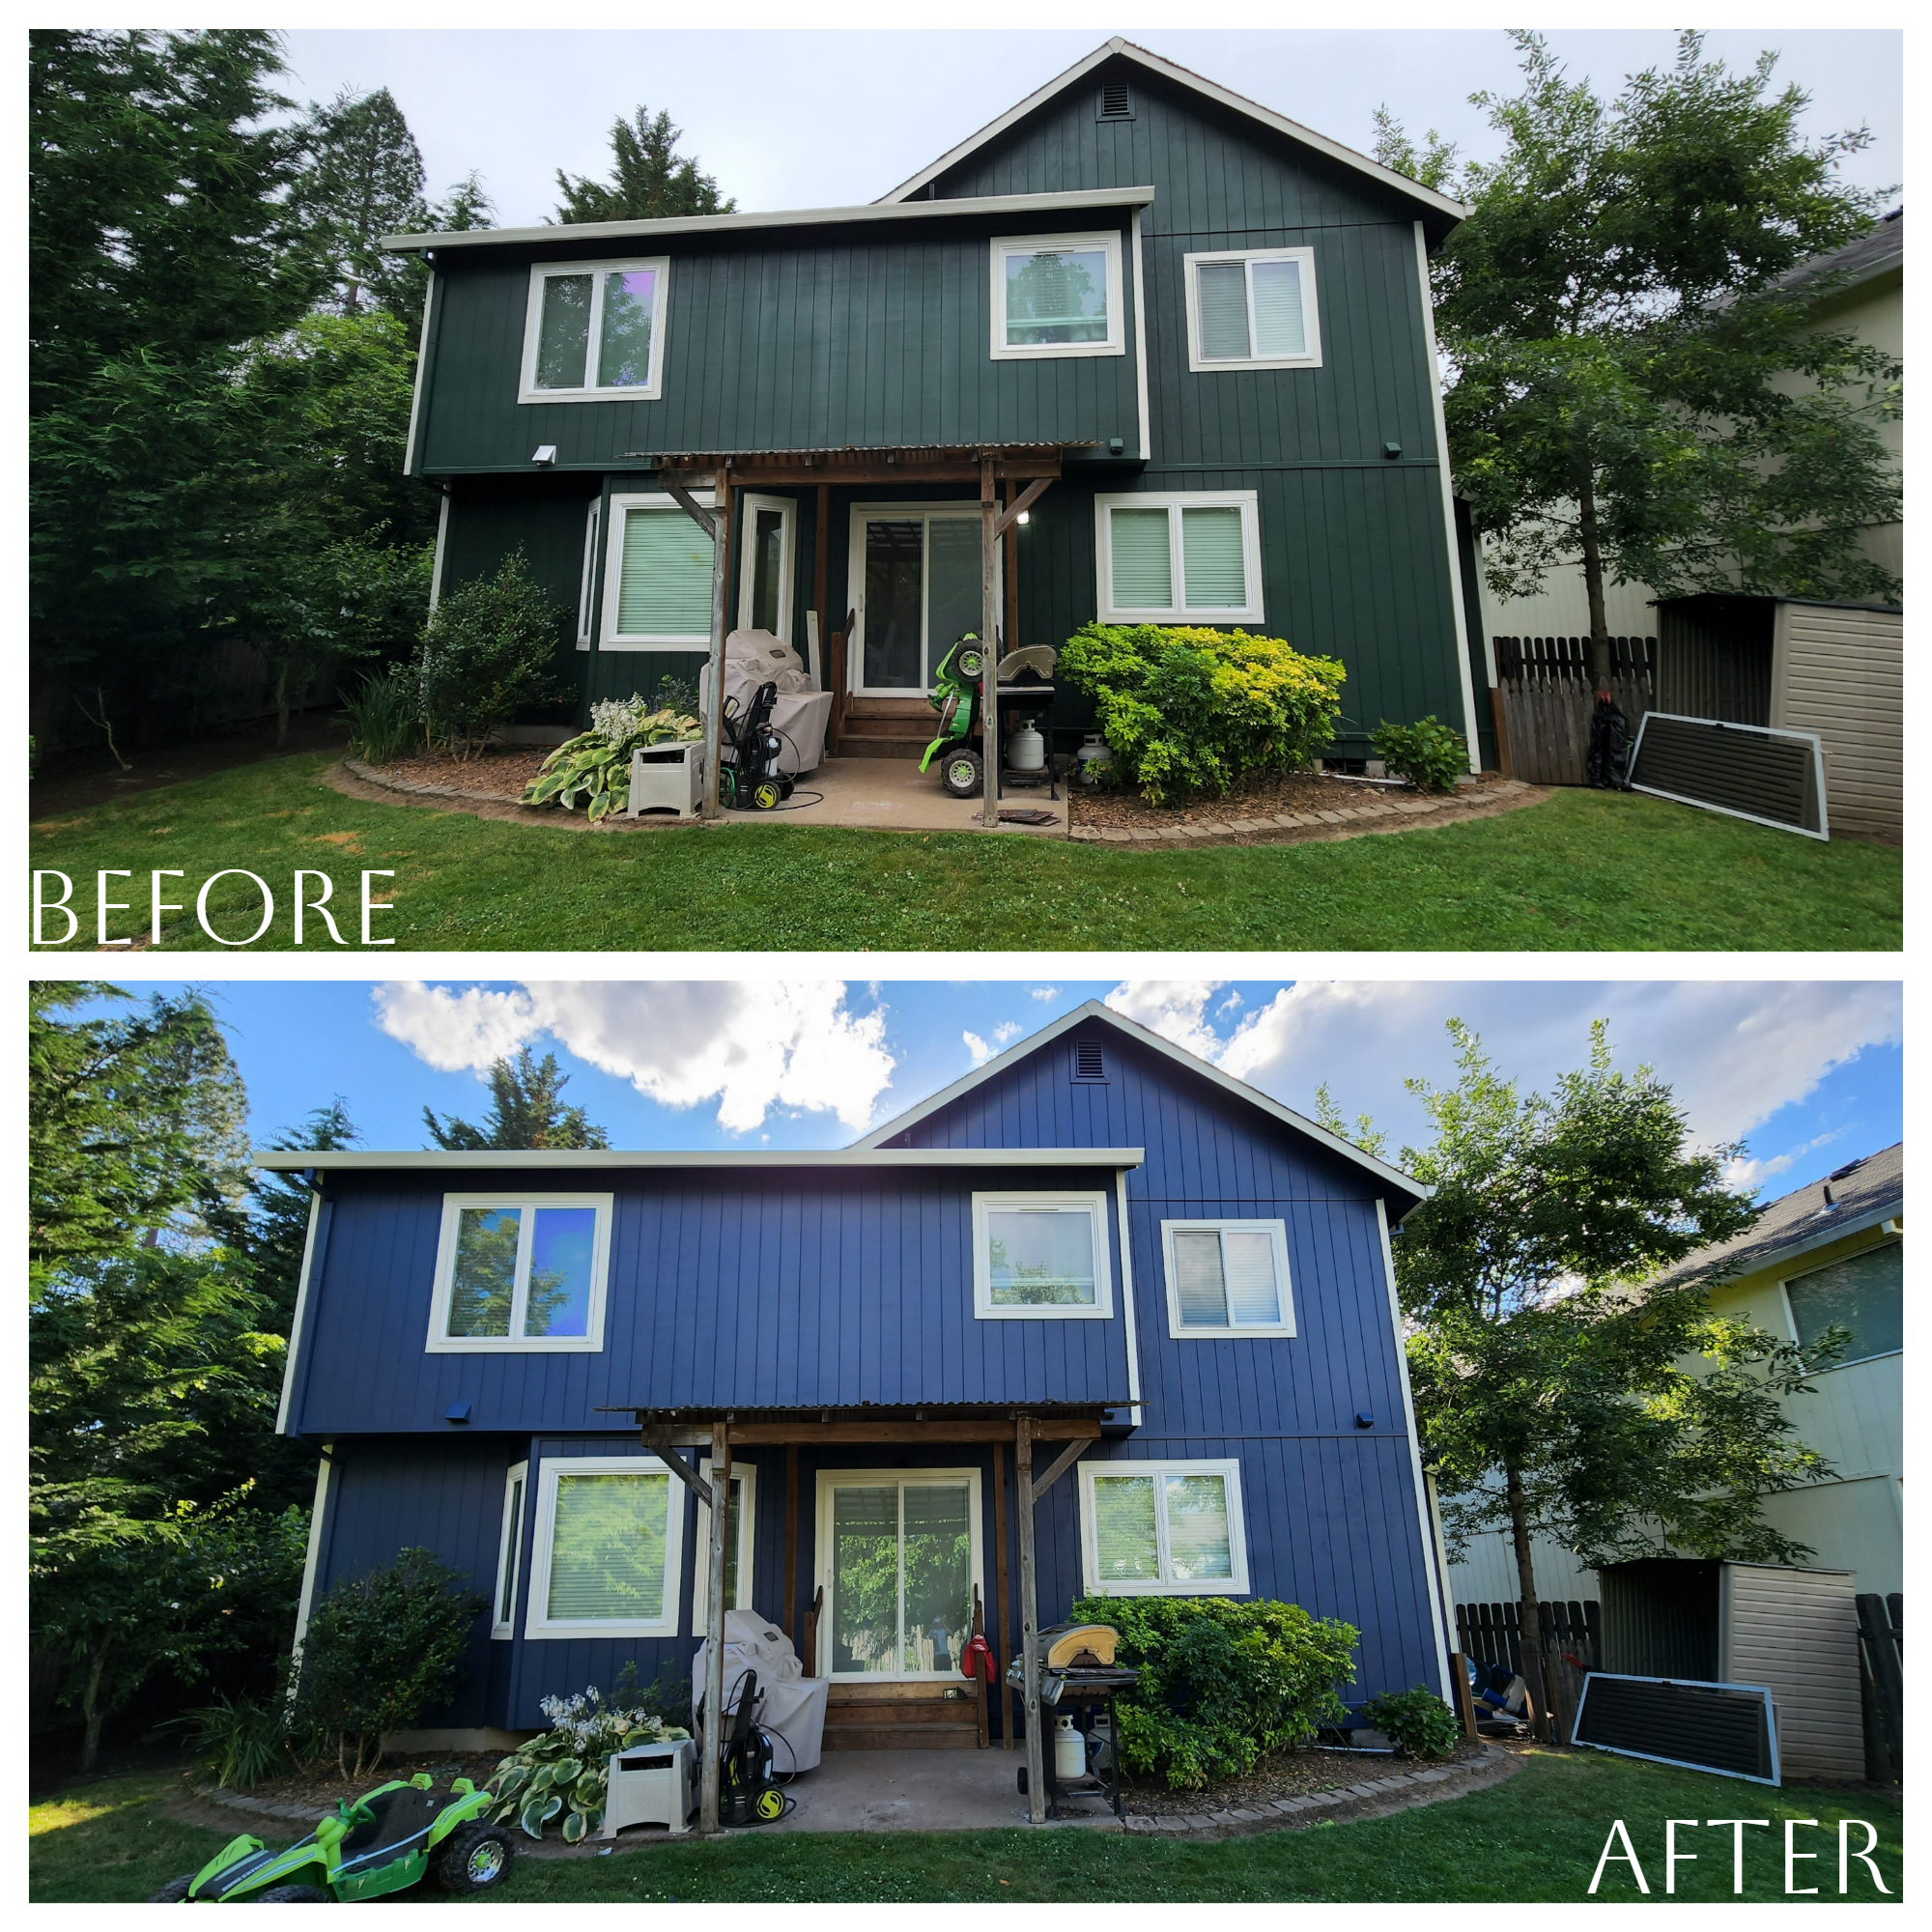 Before and after pictures of a home with blue siding transformed by a fresh coat of paint, getting it holiday-ready.